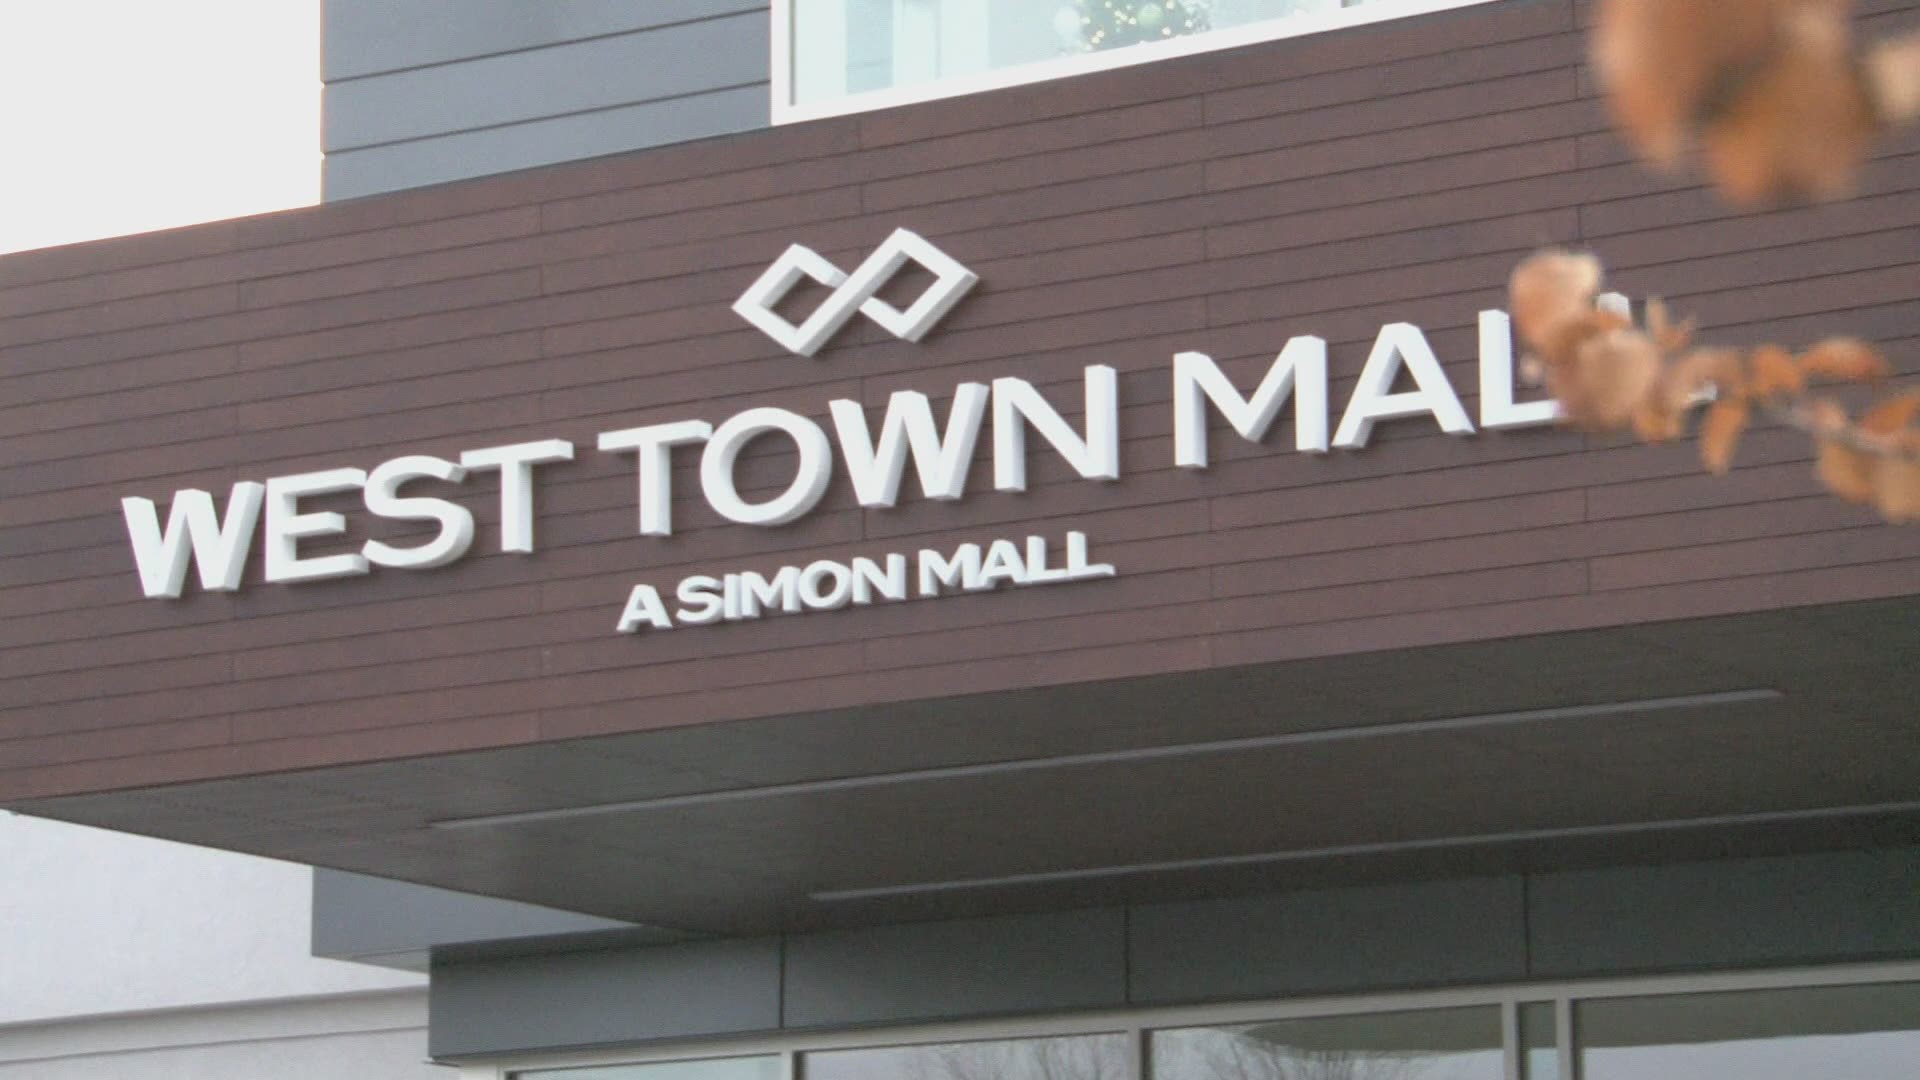 The West Town Mall will be closed so employees can spend time with their loved ones, officials said.